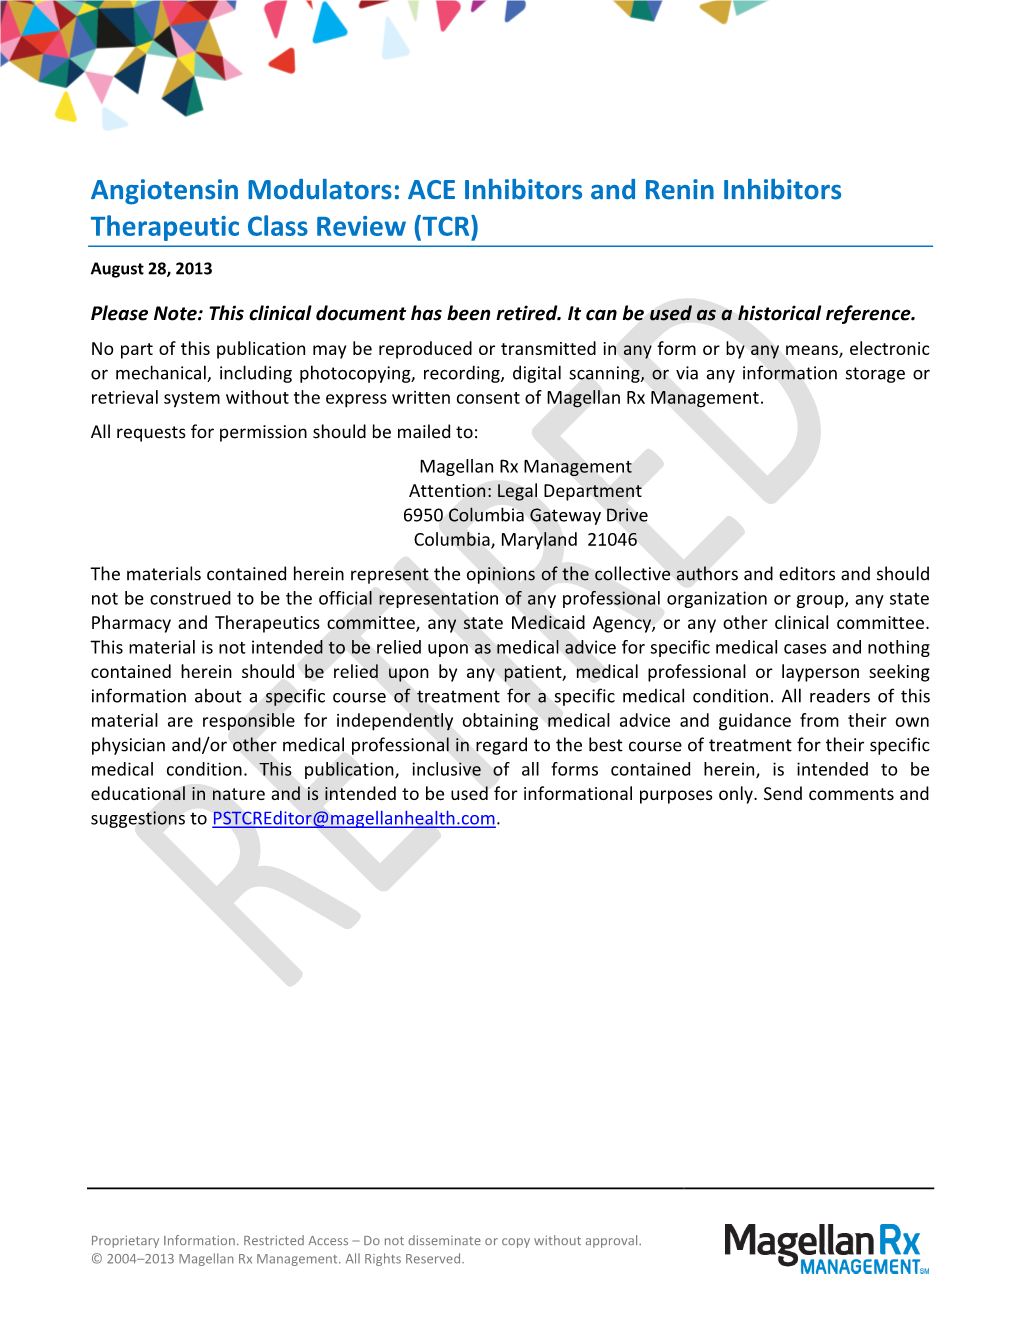 Angiotensin Modulators: ACE Inhibitors and Renin Inhibitors Therapeutic Class Review (TCR) August 28, 2013